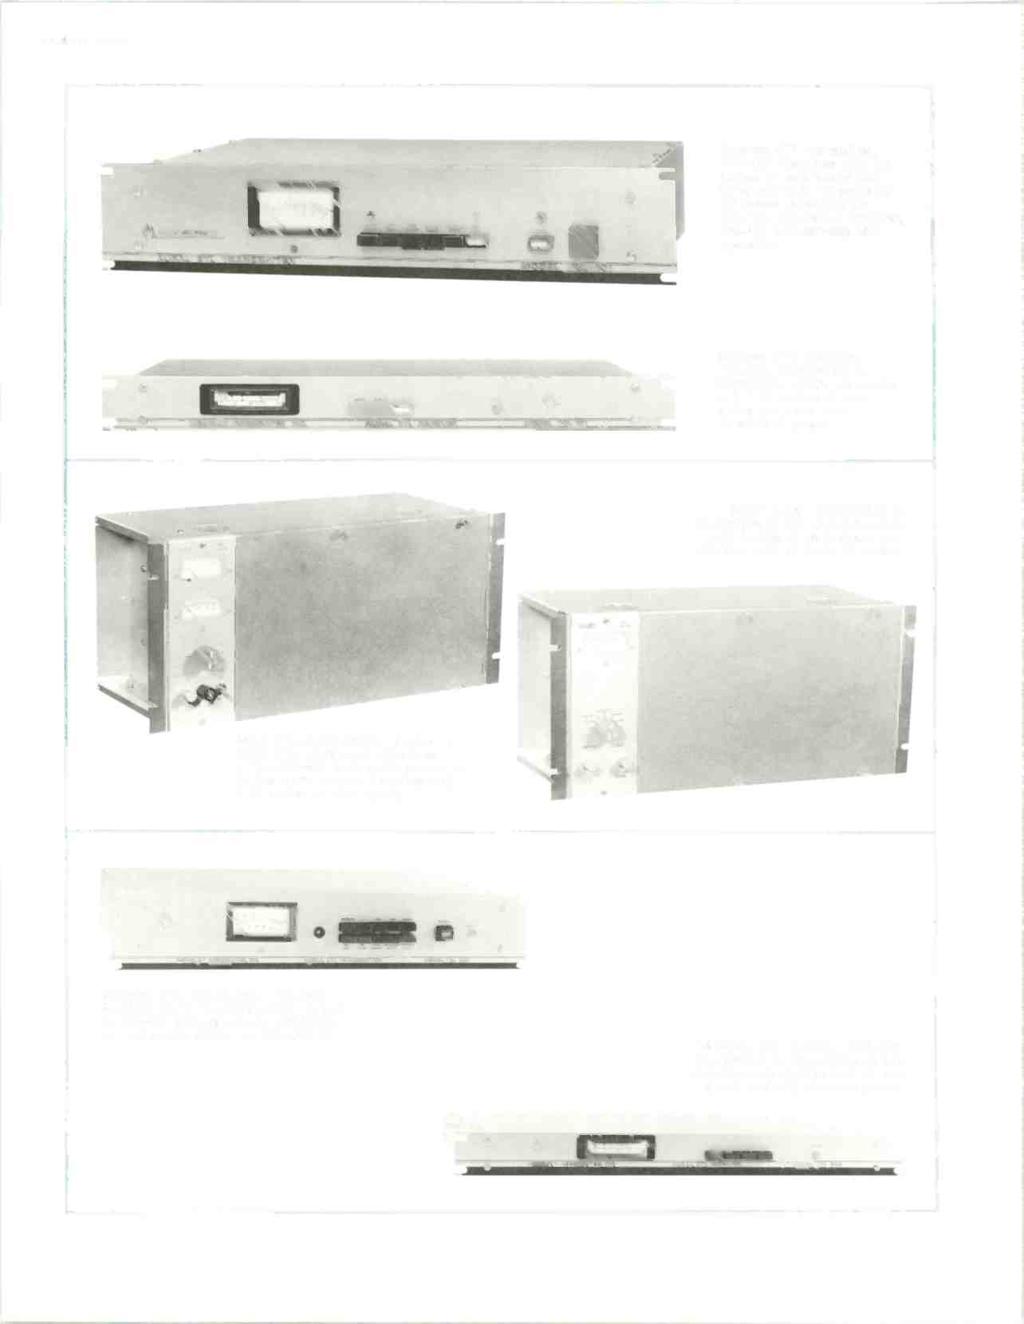 RA.401113 Page 2 1.11.1101,11 URAL TL TA.NSMITTEA 0 MODEL PCL -101 77- Moseley STL transmitter, PCL-101. Requires only 3.